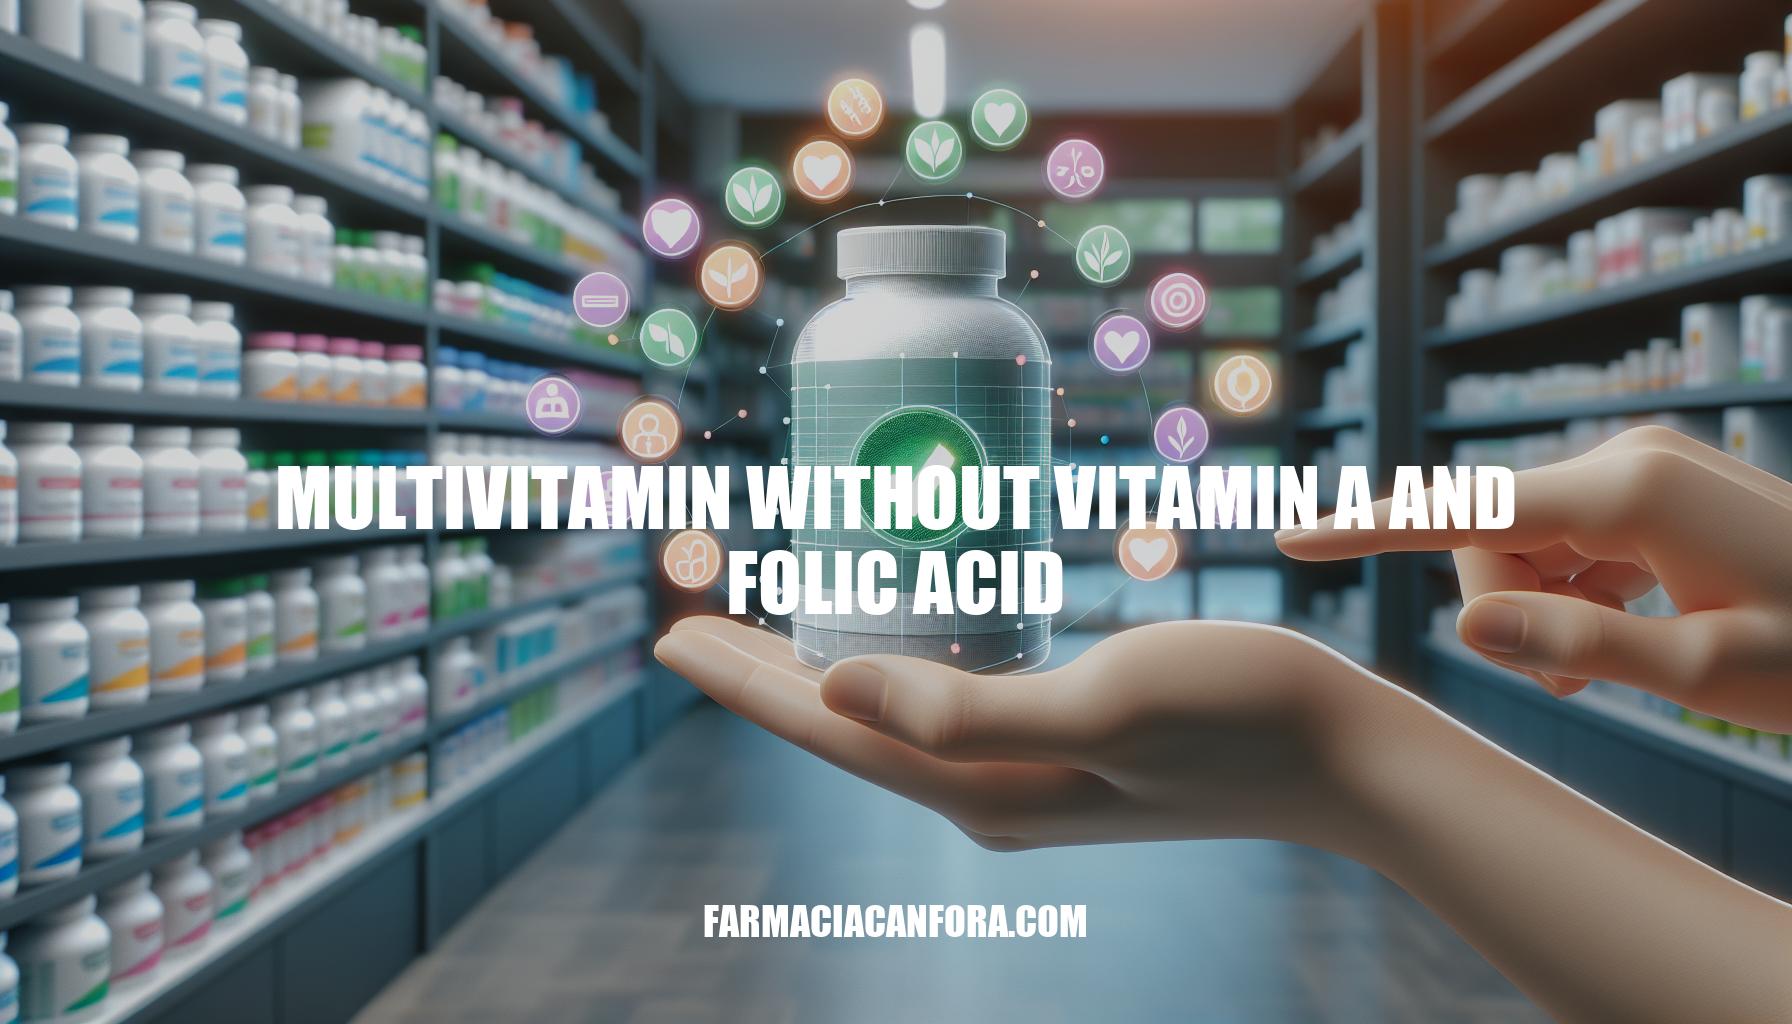 Choosing a Multivitamin Without Vitamin A and Folic Acid